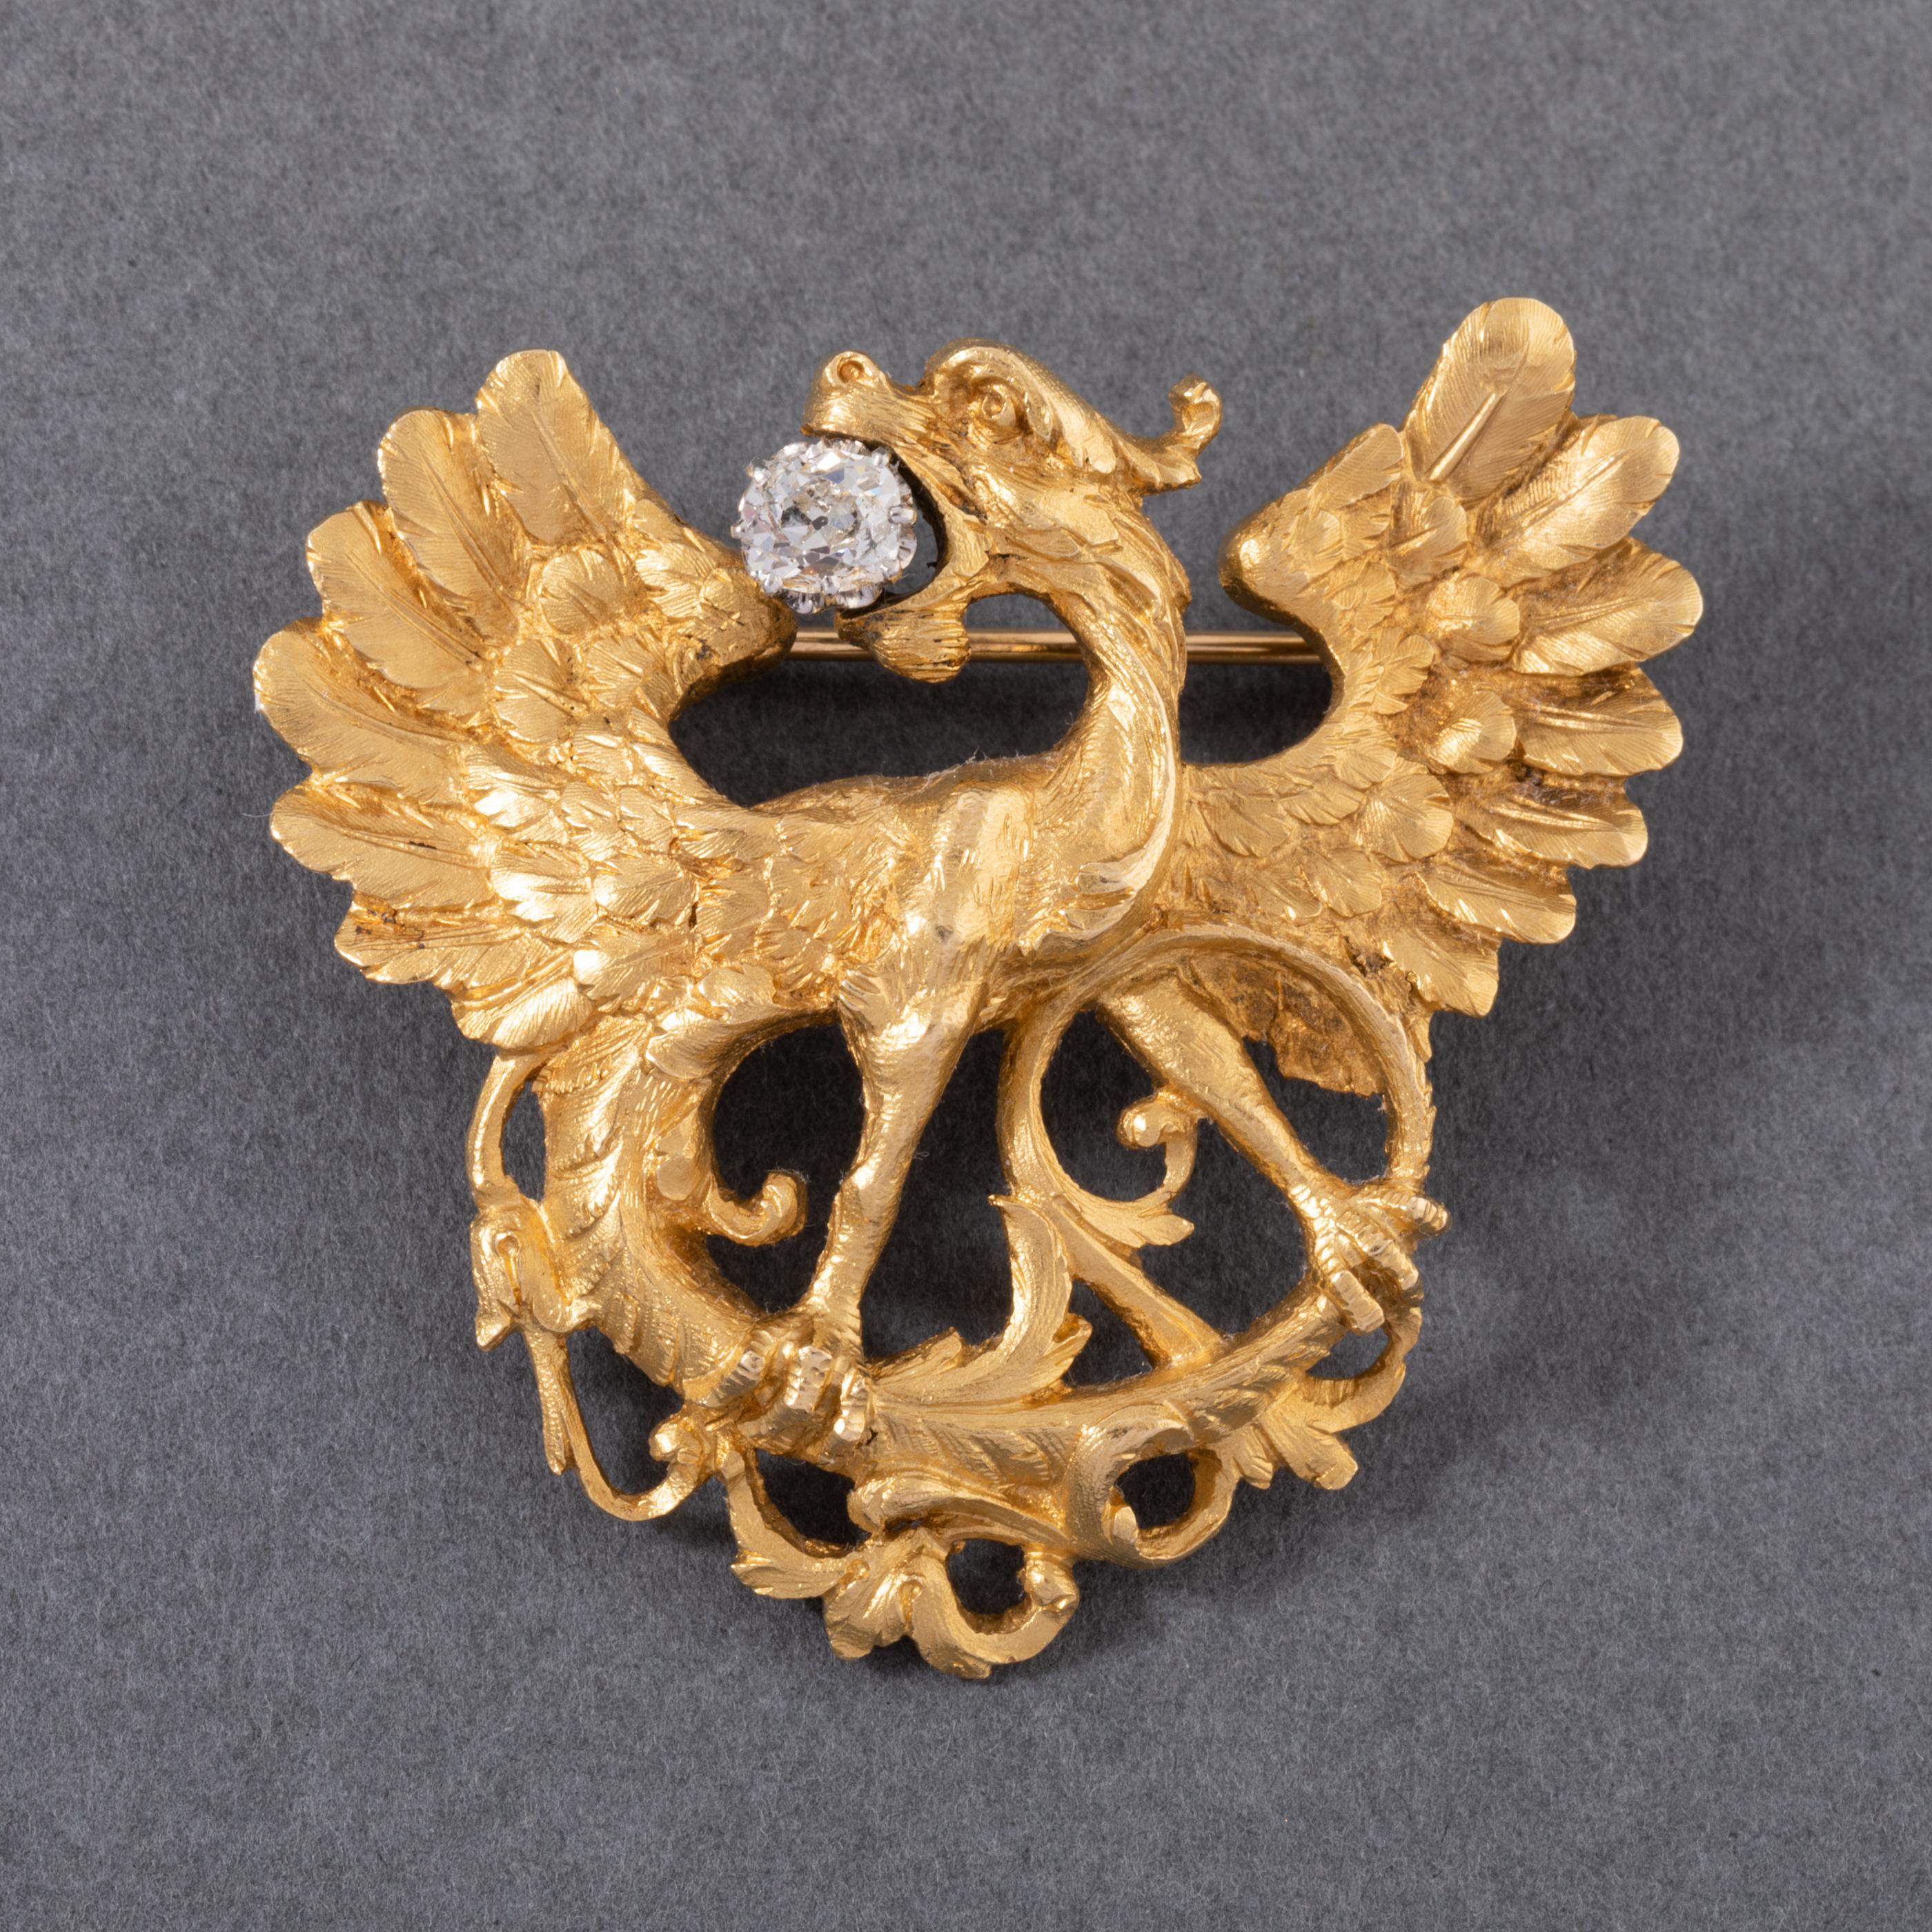 Very beautiful antique brooch, made in France circa 1890.
Made in yellow gold 18k and set with an old mine cut diamond of 0.50 carat approximately. 
HallmarKs for gold: the eagle head, hallmark of maker (unknown).
Dimensions: 4.8 * 4.9 cm.
Total